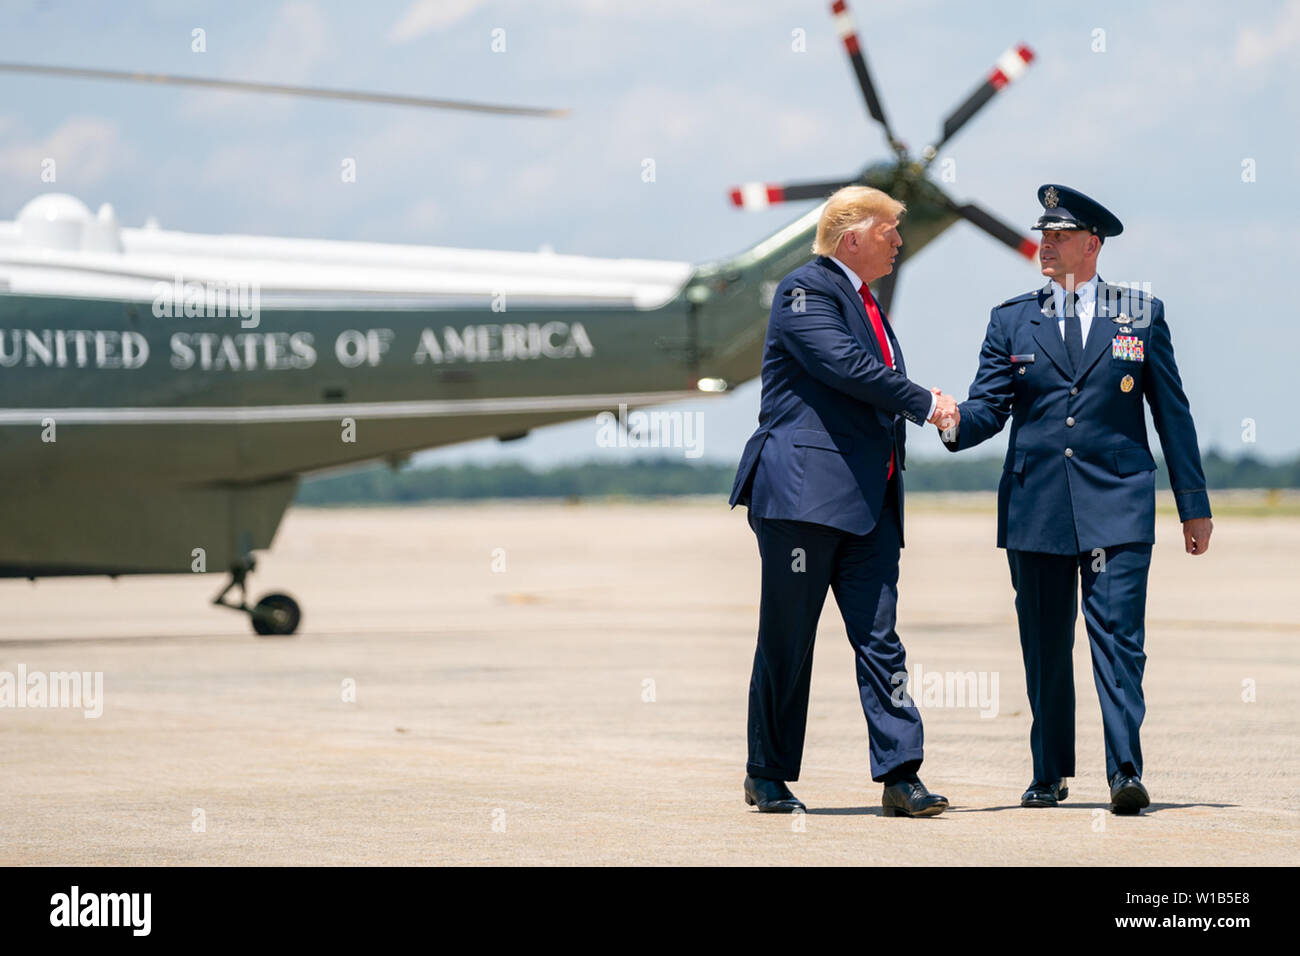 Washington, United States Of America. 26th June, 2019. President Donald J. Trump disembarks Marine One and is escorted by United States Air Force Col. Samuel J. Chesnut, Vice Commander of the 89th Airlift Wing, at Joint Base Andrews, Md. Wednesday, June 26, 2019, as they walk from Marine One to board Air Force One for his trip to Japan People: President Donald Trump Credit: Storms Media Group/Alamy Live News Stock Photo